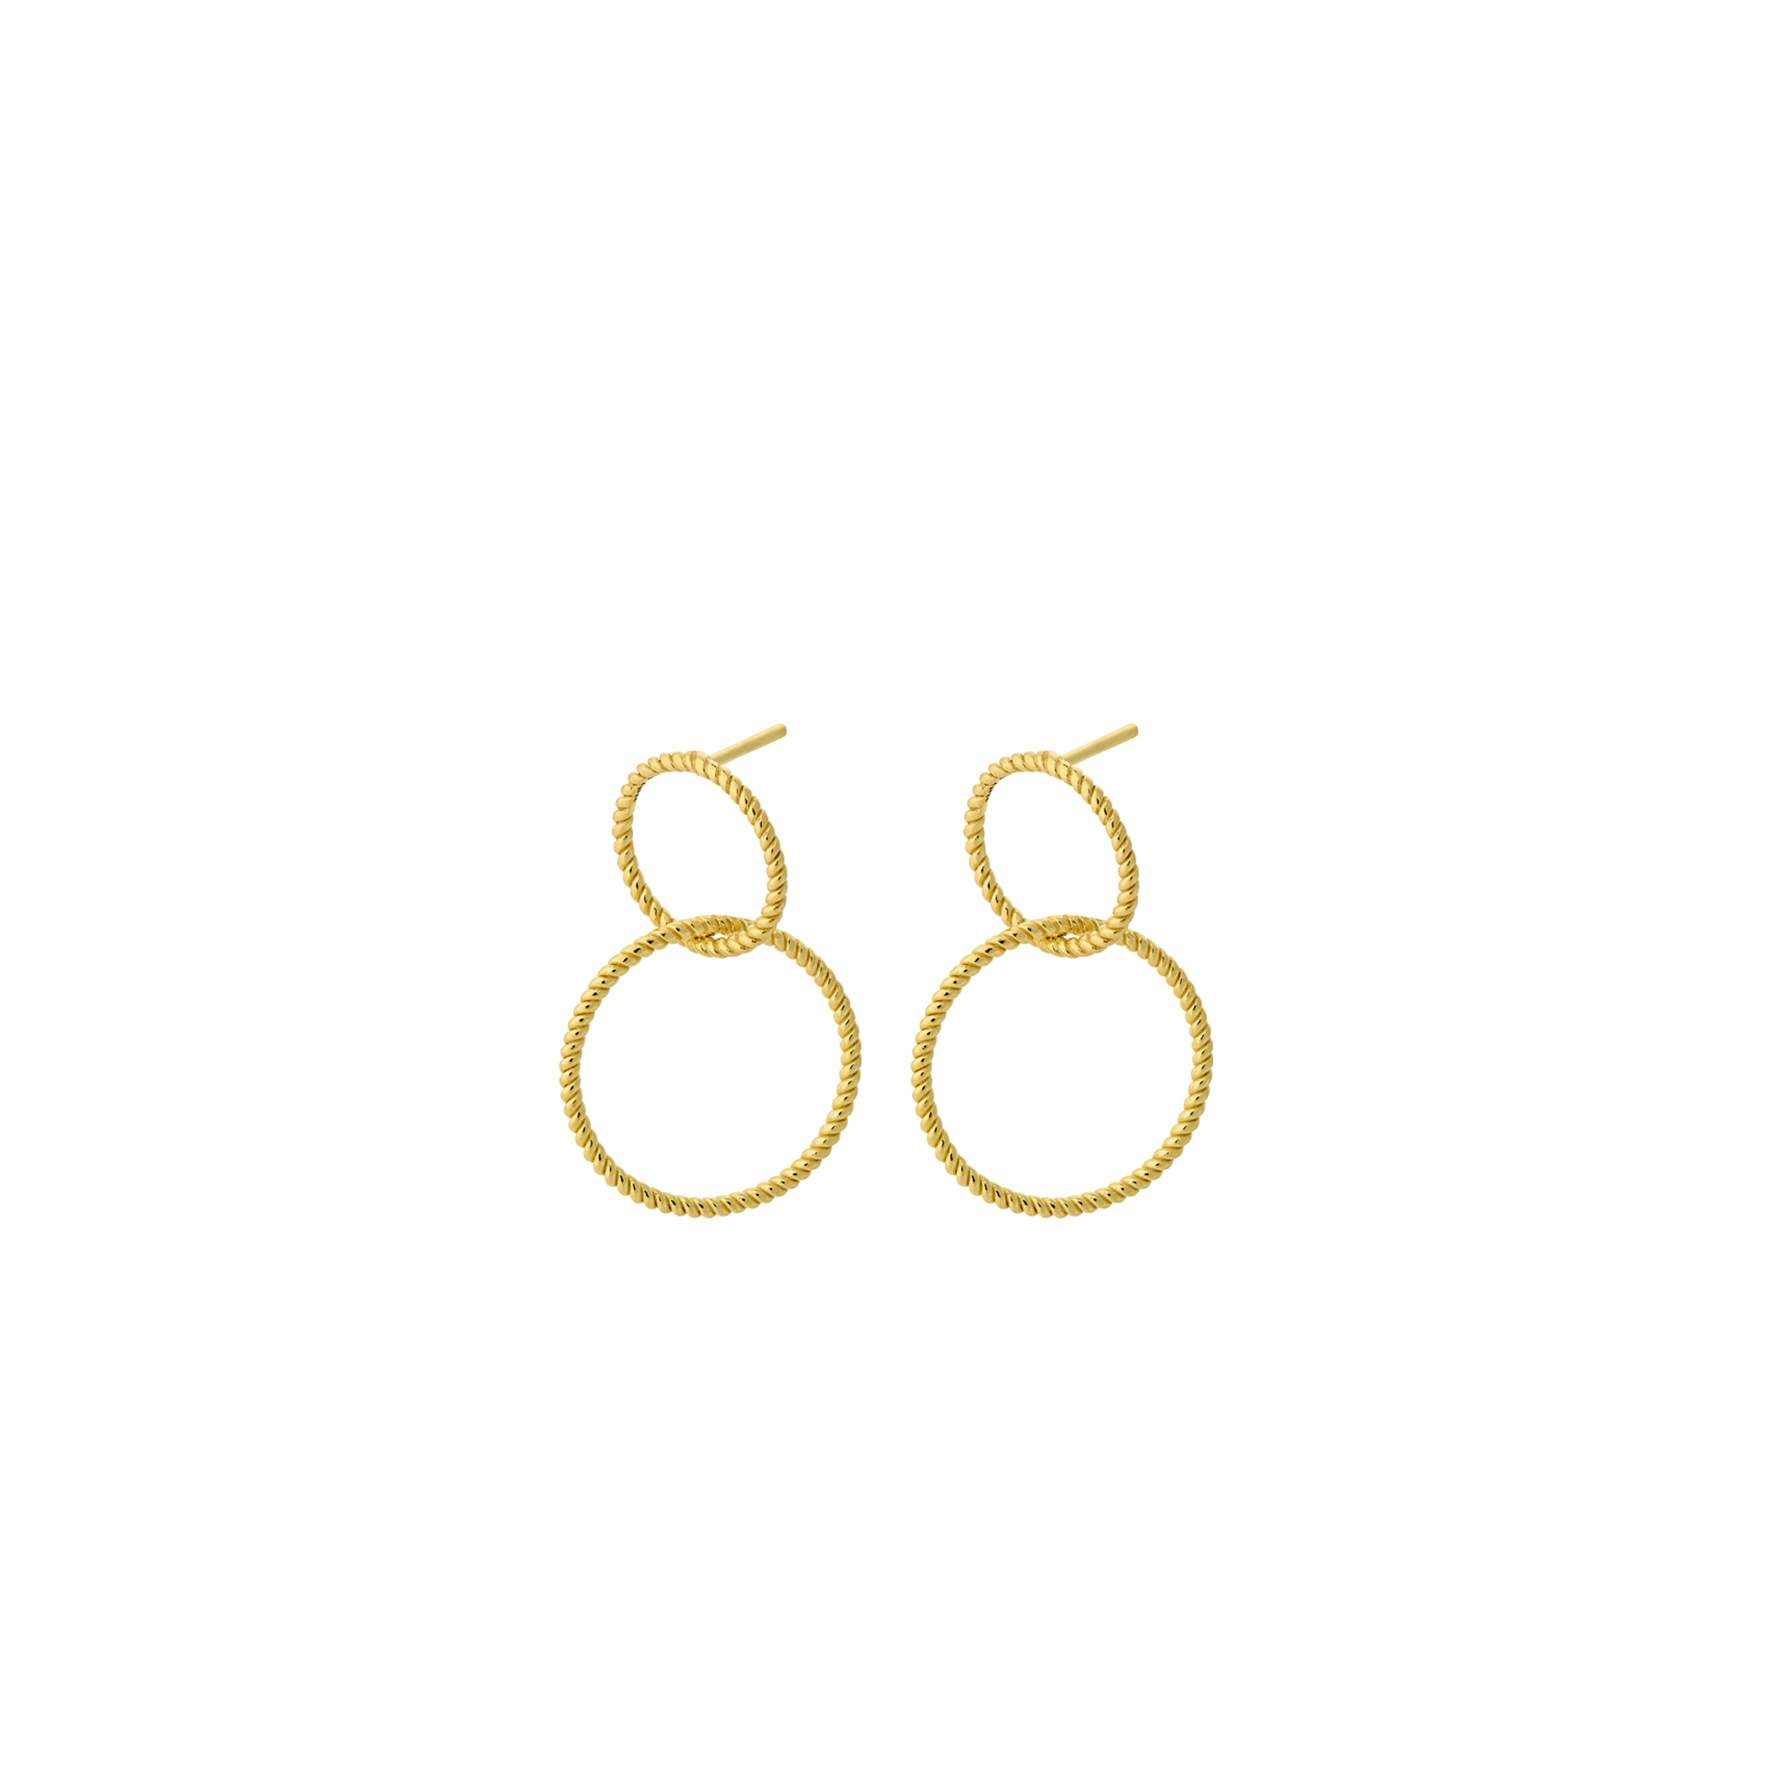 Double Twisted Earrings from Pernille Corydon in Goldplated-Silver Sterling 925